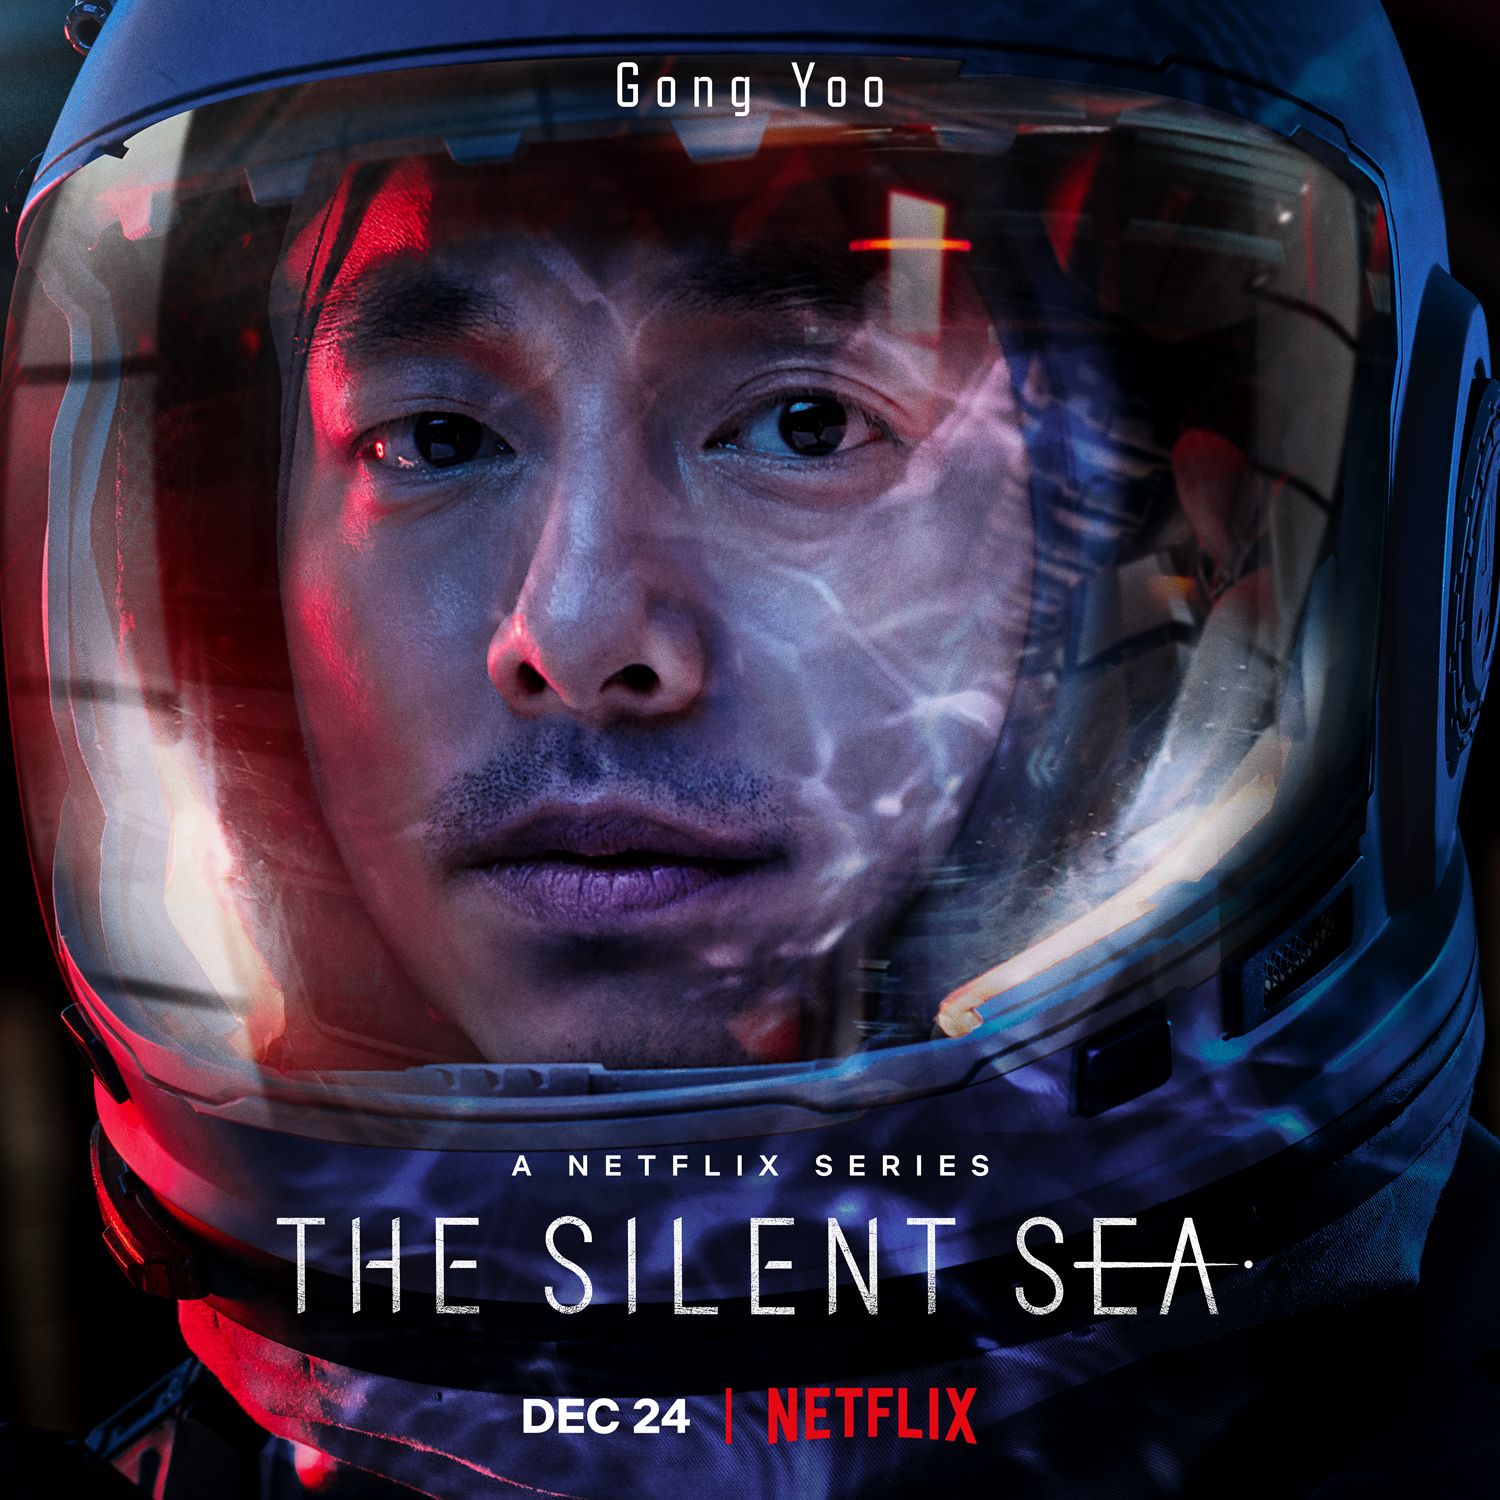 the-silent-sea-poster-gong-yoo